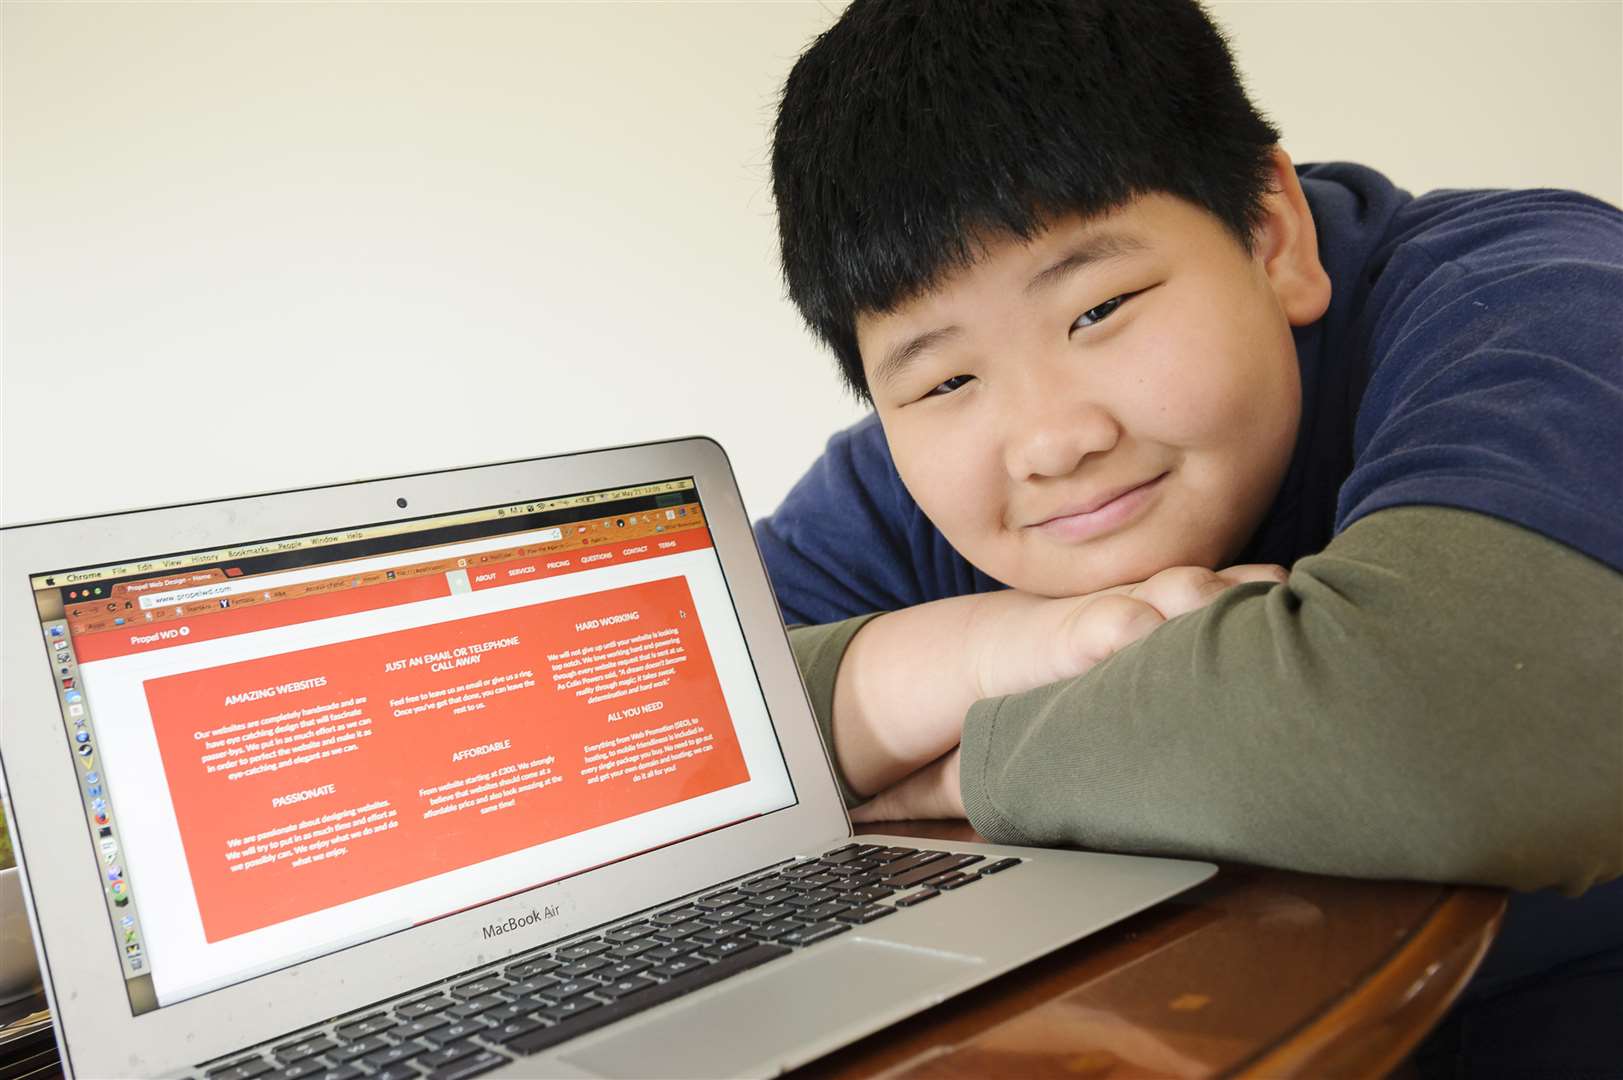 Ryan Zhang, 10, has designed his own website from scratch and is hoping to use it to showcase his code-writing skills.